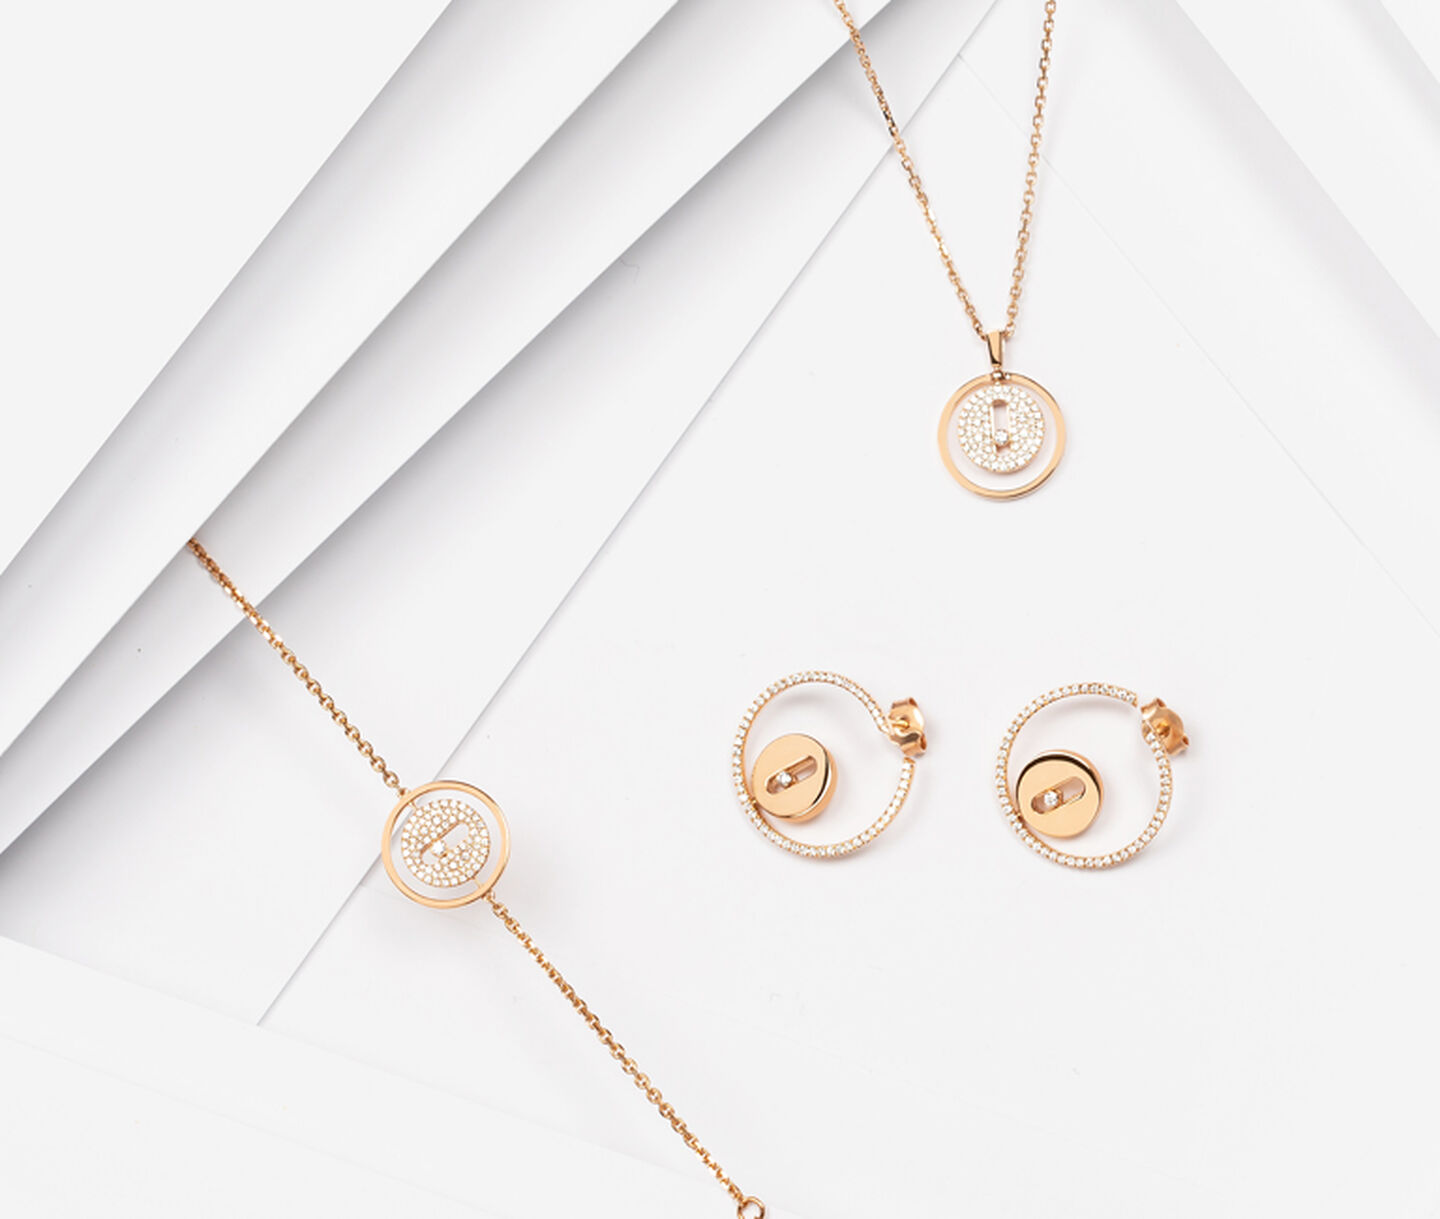 A collection of round gold and diamond pendant jewellery including earrings, a bracelet and a necklace